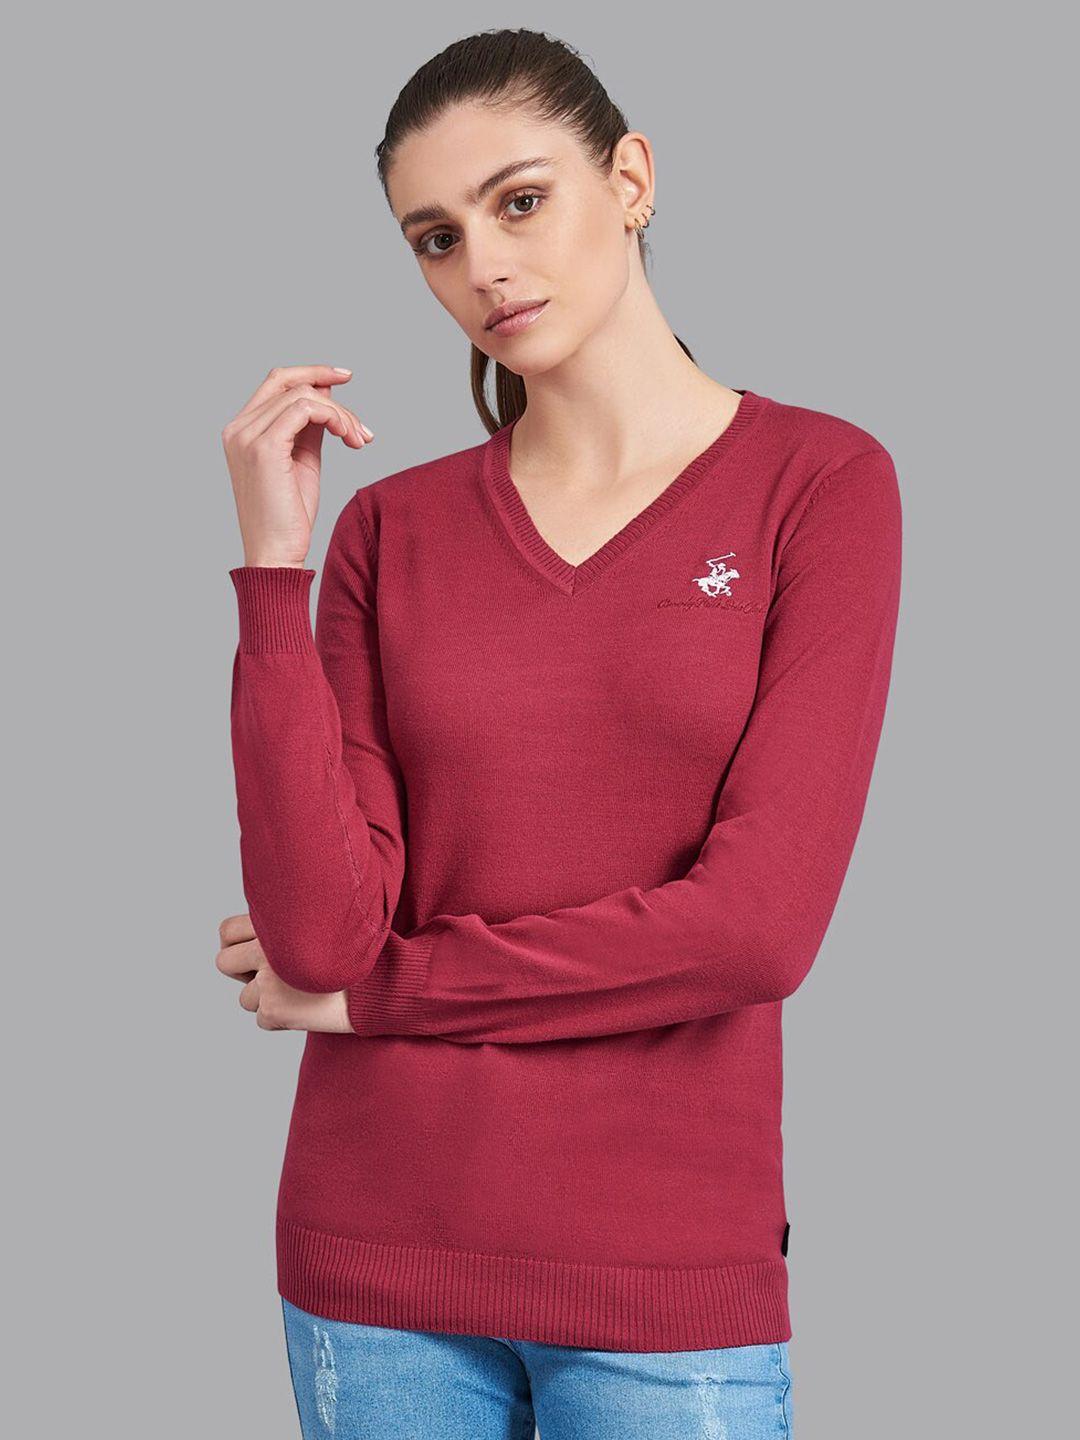 Beverly Hills Polo Club Women Burgundy Solid Pullover